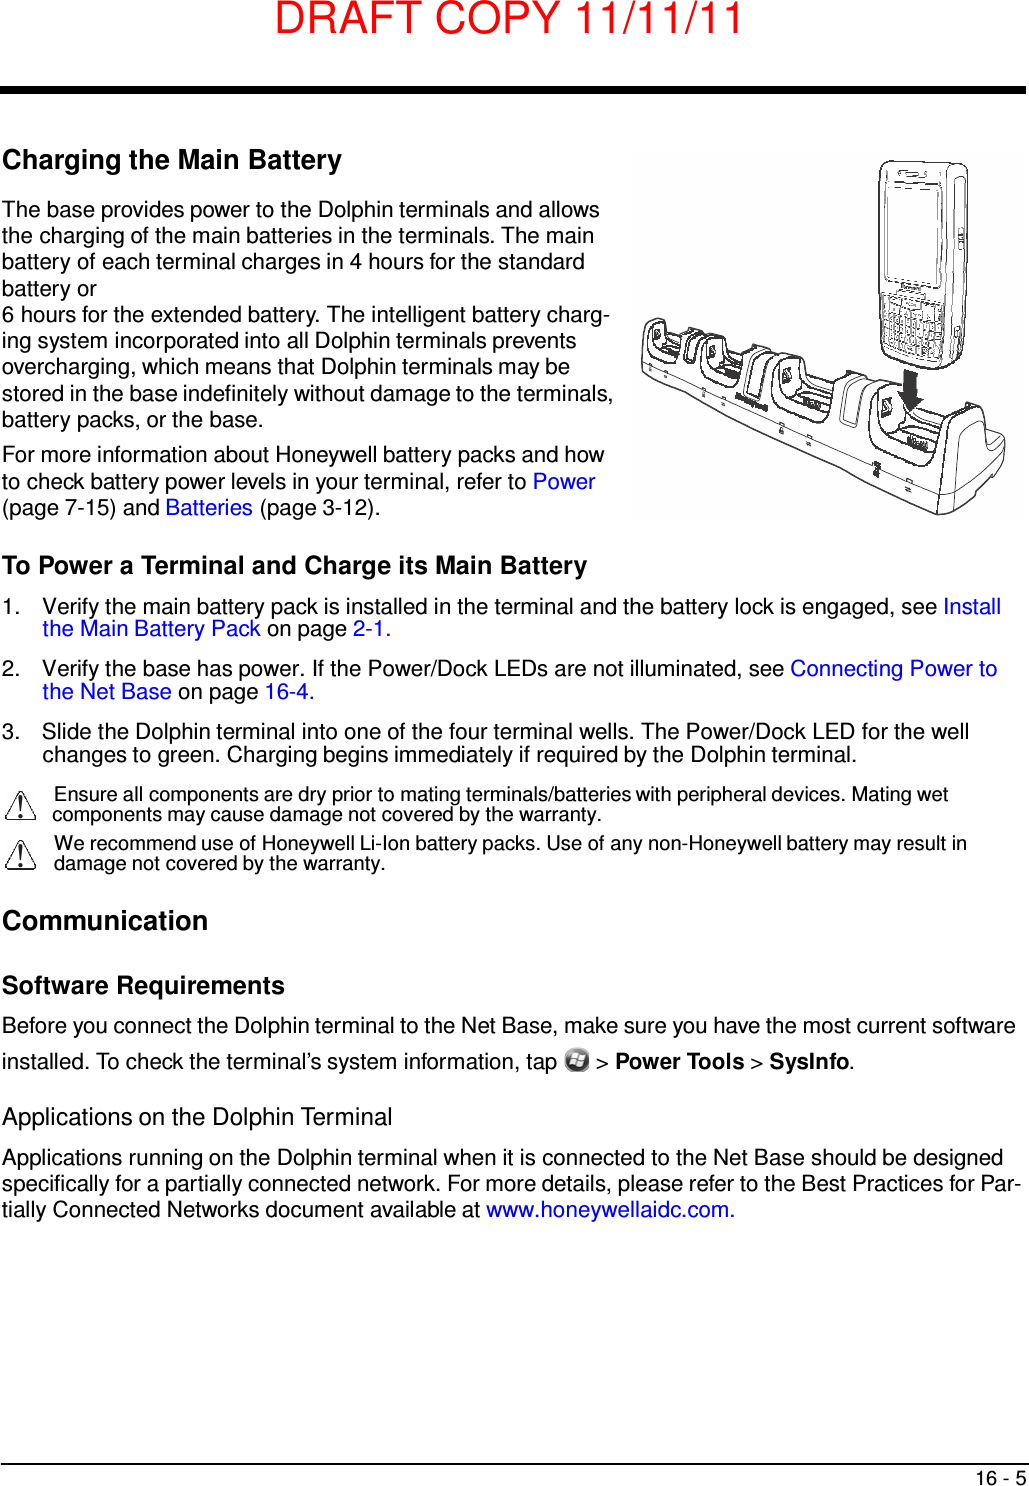 DRAFT COPY 11/11/11 16 - 5     !   Charging the Main Battery  The base provides power to the Dolphin terminals and allows the charging of the main batteries in the terminals. The main battery of each terminal charges in 4 hours for the standard battery or 6 hours for the extended battery. The intelligent battery charg- ing system incorporated into all Dolphin terminals prevents overcharging, which means that Dolphin terminals may be stored in the base indefinitely without damage to the terminals, battery packs, or the base. For more information about Honeywell battery packs and how to check battery power levels in your terminal, refer to Power (page 7-15) and Batteries (page 3-12).  To Power a Terminal and Charge its Main Battery  1.  Verify the main battery pack is installed in the terminal and the battery lock is engaged, see Install the Main Battery Pack on page 2-1.  2.  Verify the base has power. If the Power/Dock LEDs are not illuminated, see Connecting Power to the Net Base on page 16-4.  3.  Slide the Dolphin terminal into one of the four terminal wells. The Power/Dock LED for the well changes to green. Charging begins immediately if required by the Dolphin terminal.  Ensure all components are dry prior to mating terminals/batteries with peripheral devices. Mating wet !   components may cause damage not covered by the warranty. We recommend use of Honeywell Li-Ion battery packs. Use of any non-Honeywell battery may result in damage not covered by the warranty.   Communication   Software Requirements  Before you connect the Dolphin terminal to the Net Base, make sure you have the most current software installed. To check the terminal’s system information, tap  &gt; Power Tools &gt; SysInfo.  Applications on the Dolphin Terminal  Applications running on the Dolphin terminal when it is connected to the Net Base should be designed specifically for a partially connected network. For more details, please refer to the Best Practices for Par- tially Connected Networks document available at www.honeywellaidc.com. 